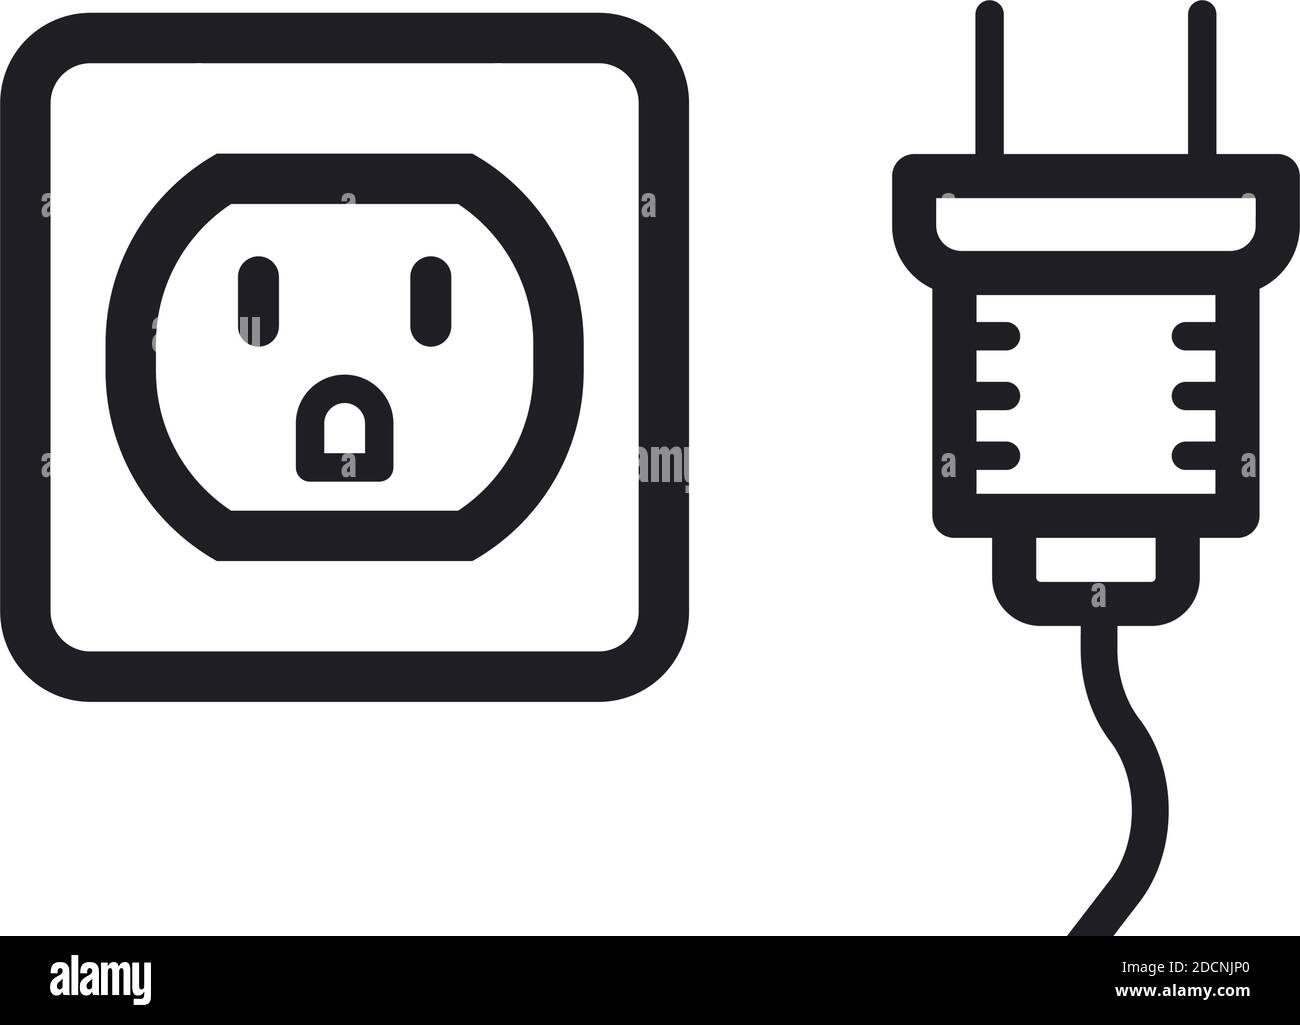 Electricity outlet socket and power plug type b usa standard vector illustration icon Stock Vector